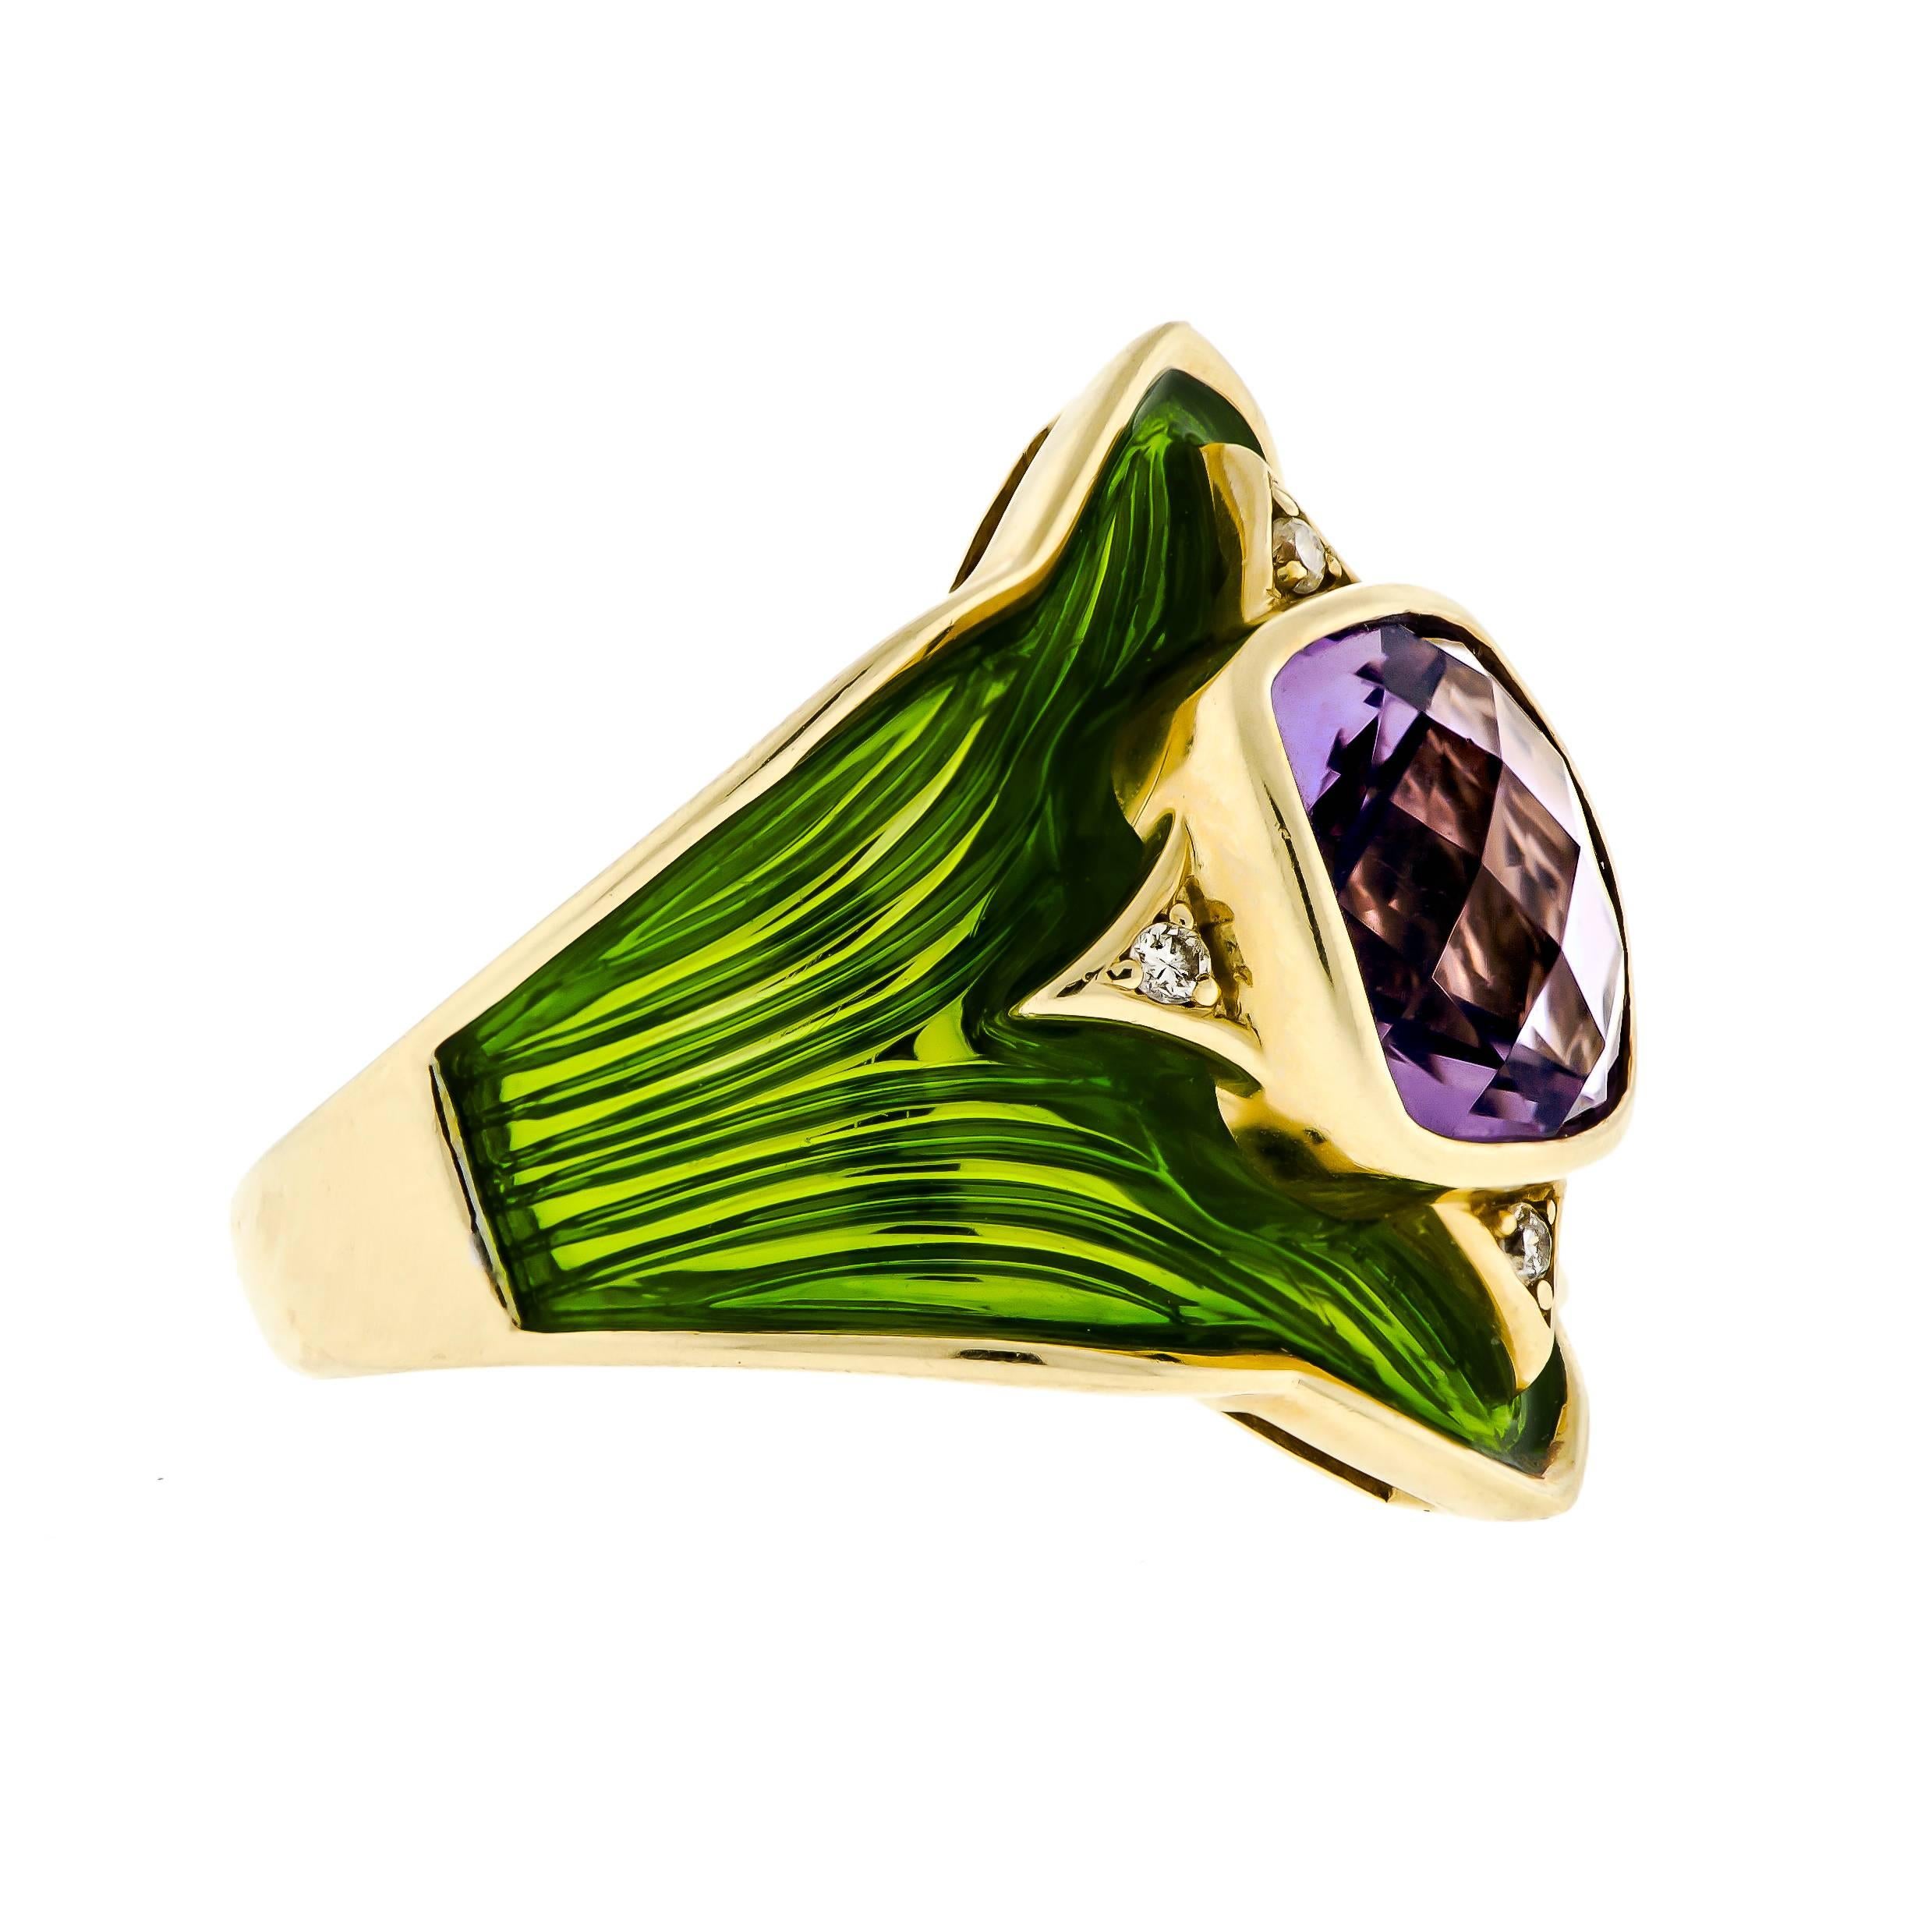 Vintage amethyst diamond and enamel cocktail ring centrally set with one oval bezel set brilliant cut amethyst diamond accents and green enamel 14kt yellow gold.  Very fine condition. 

12.60 dwts. 